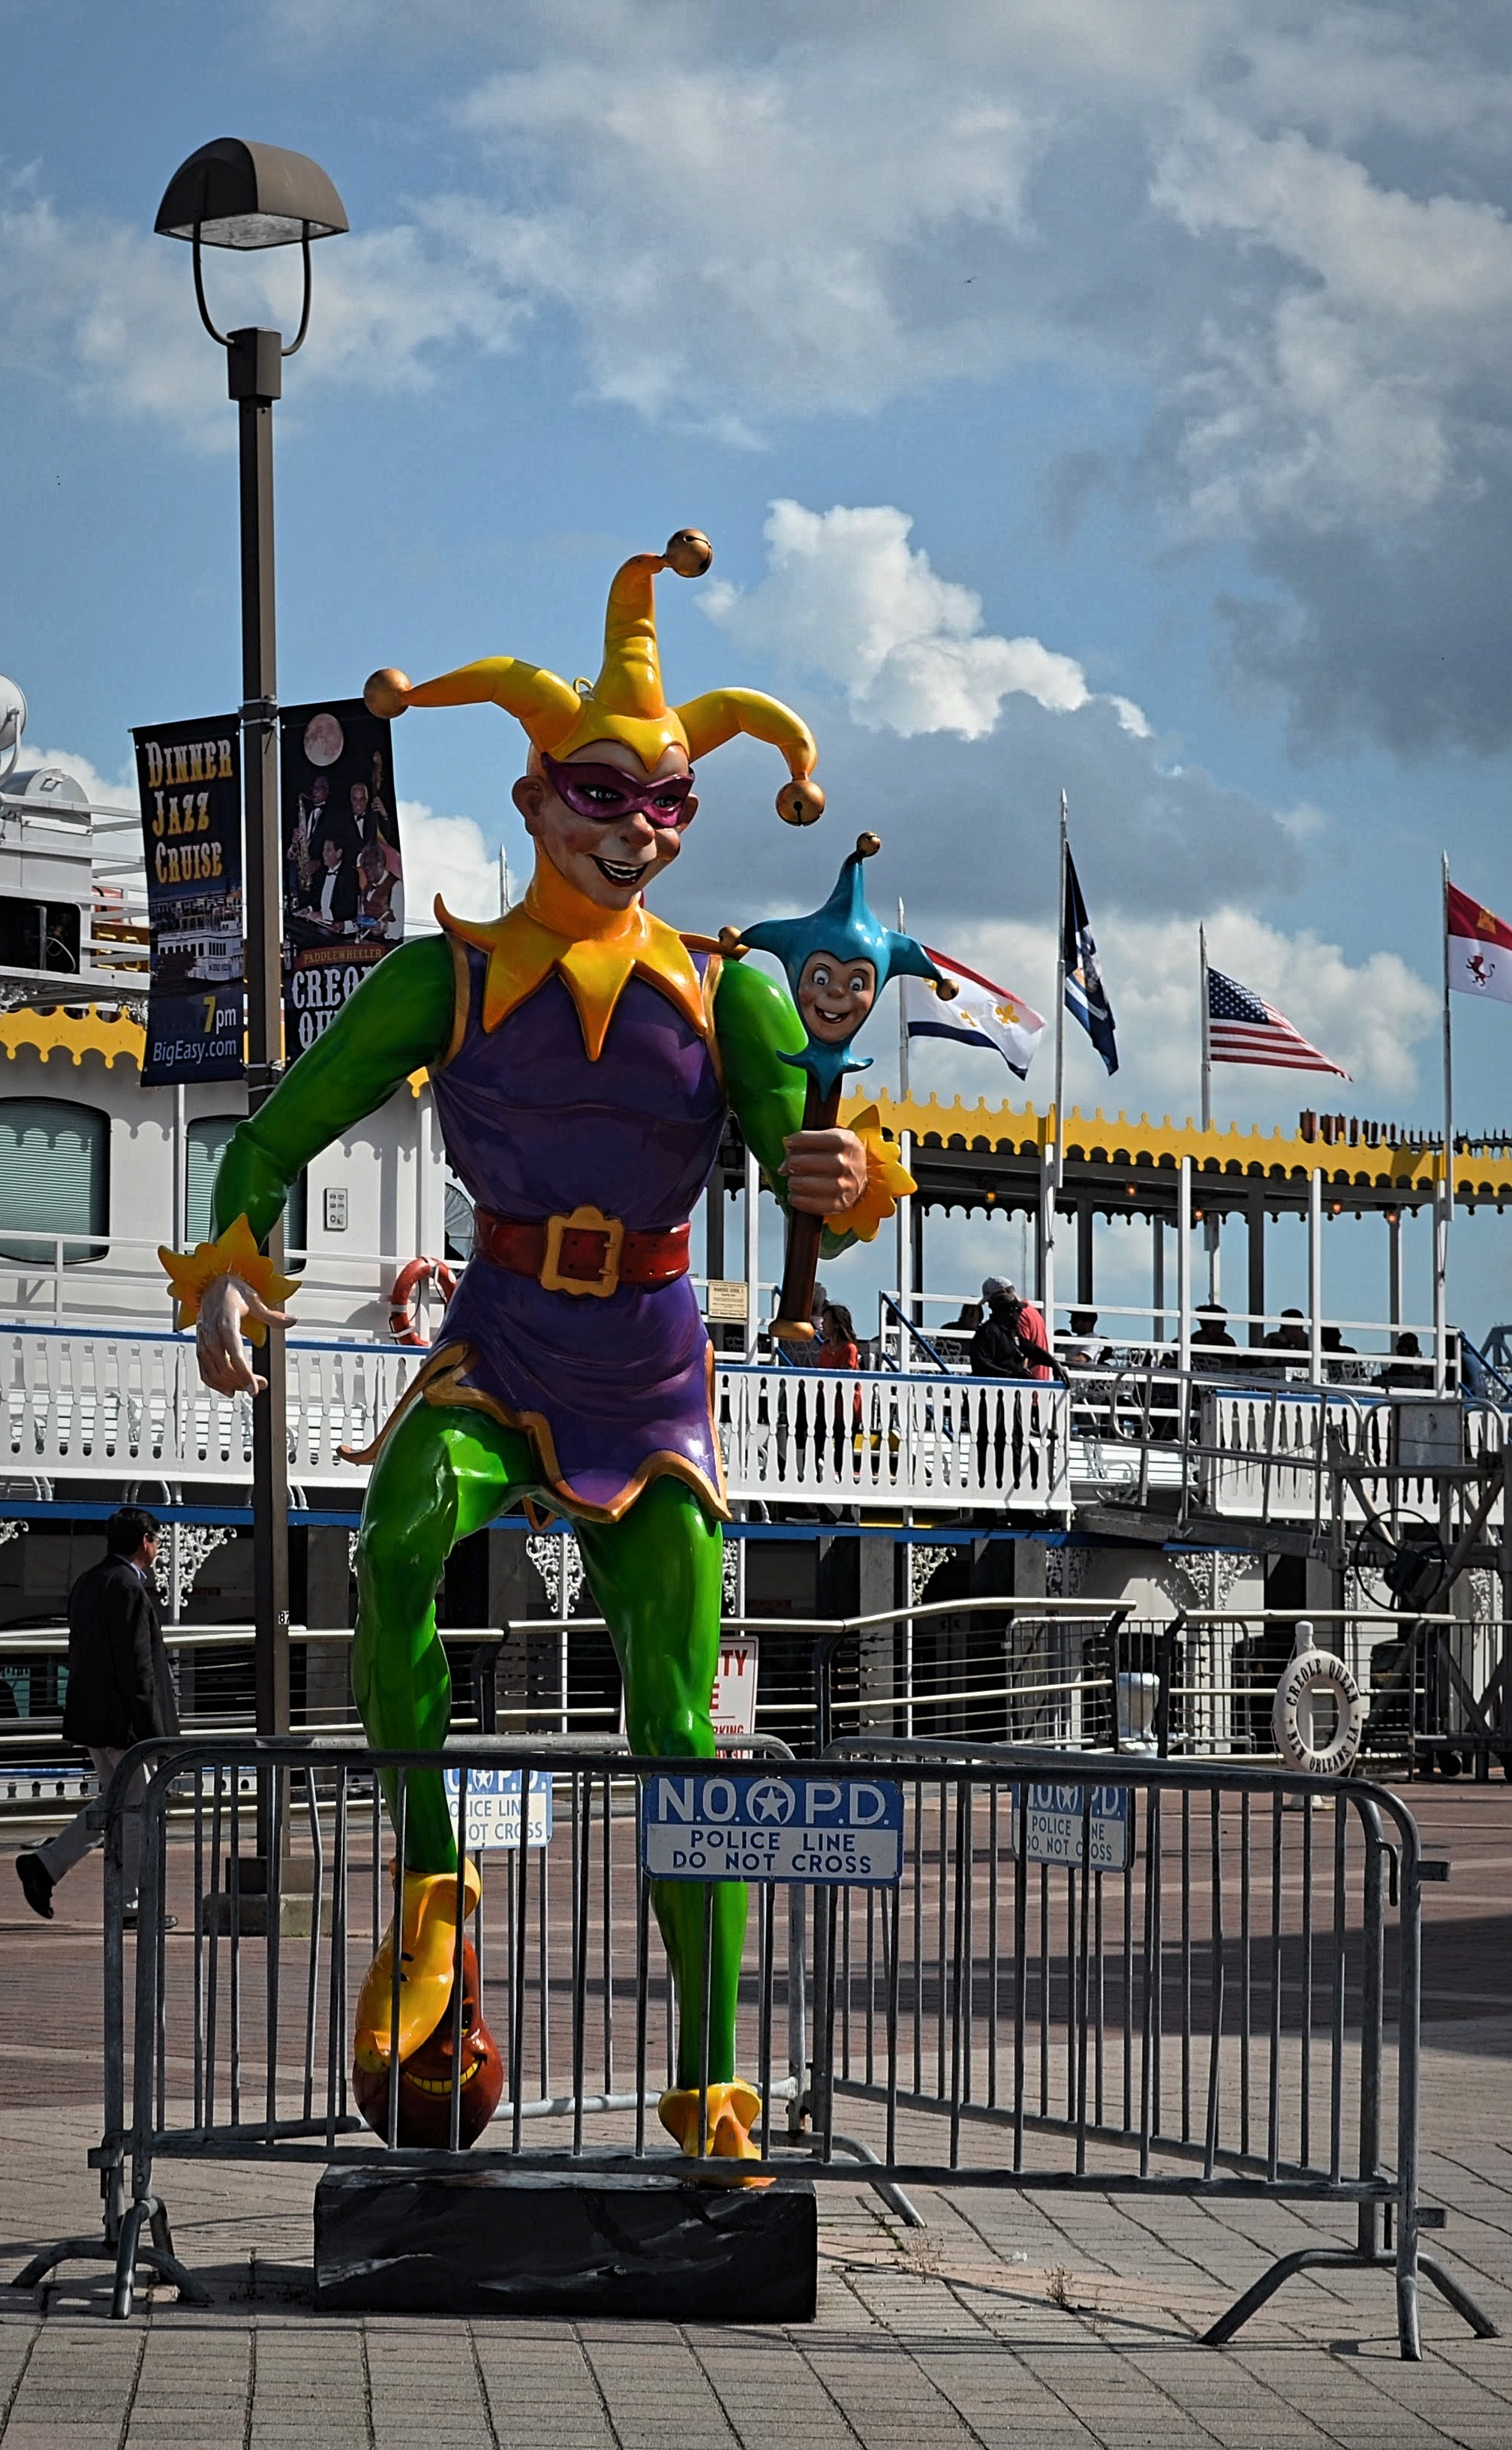 Steamboat in background with Mardi gras jester statue in front,new Orleans, travel blog, new orleans Louisiana, NOLA, the big east, new Orleans photography, Atlanta photographer, new Orleans travel, new Orleans travel blog, traveling blog, jester, Mardi gras, new Orleans Mardi gras, fat Tuesday, cajun, 